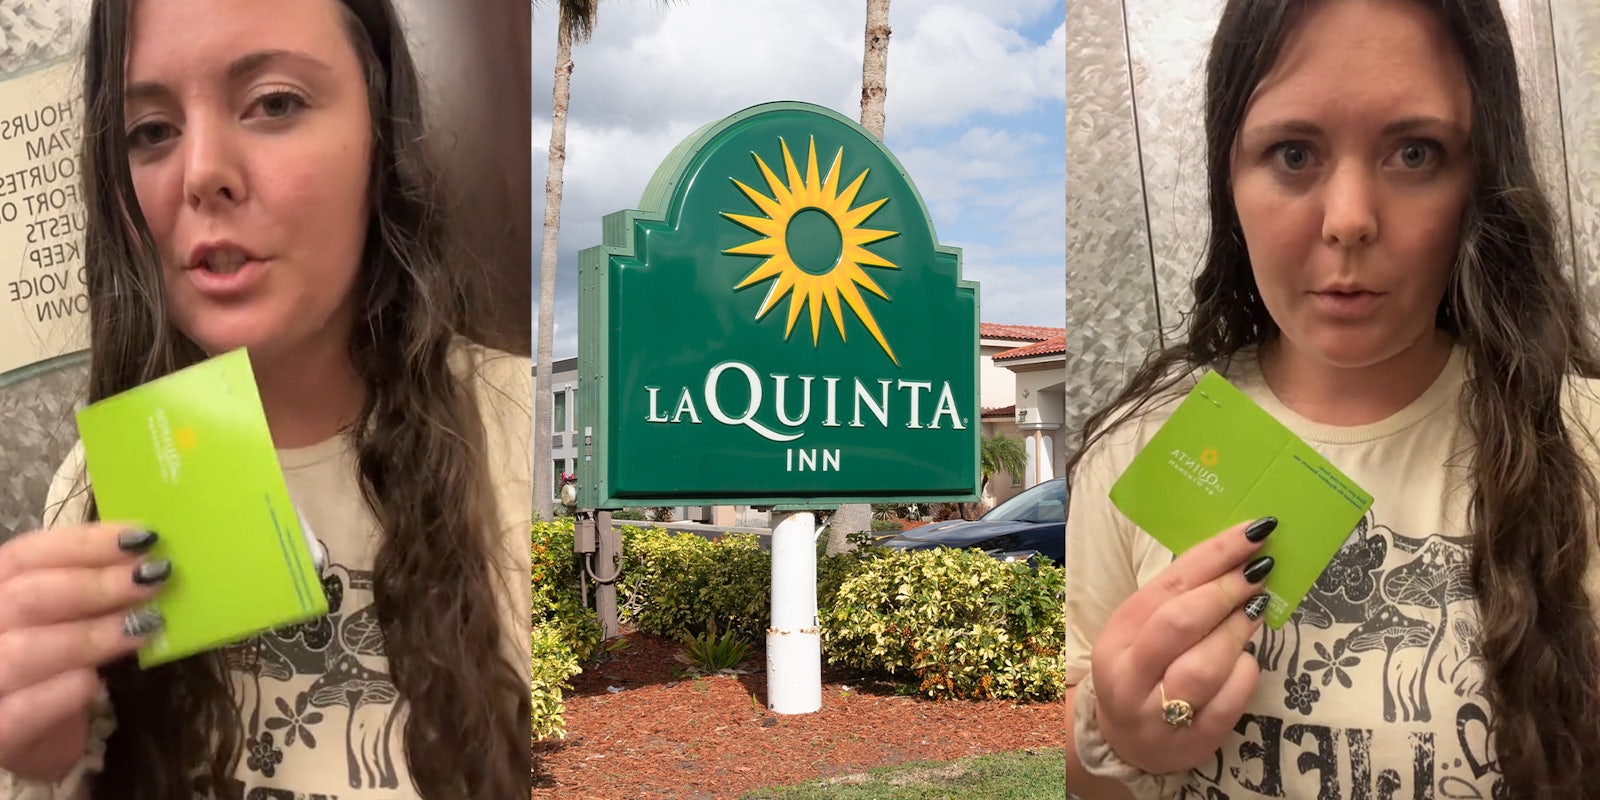 Hotel guest says La Quinta canceled their reservations without warning, gave her a room that already had people sleeping in it